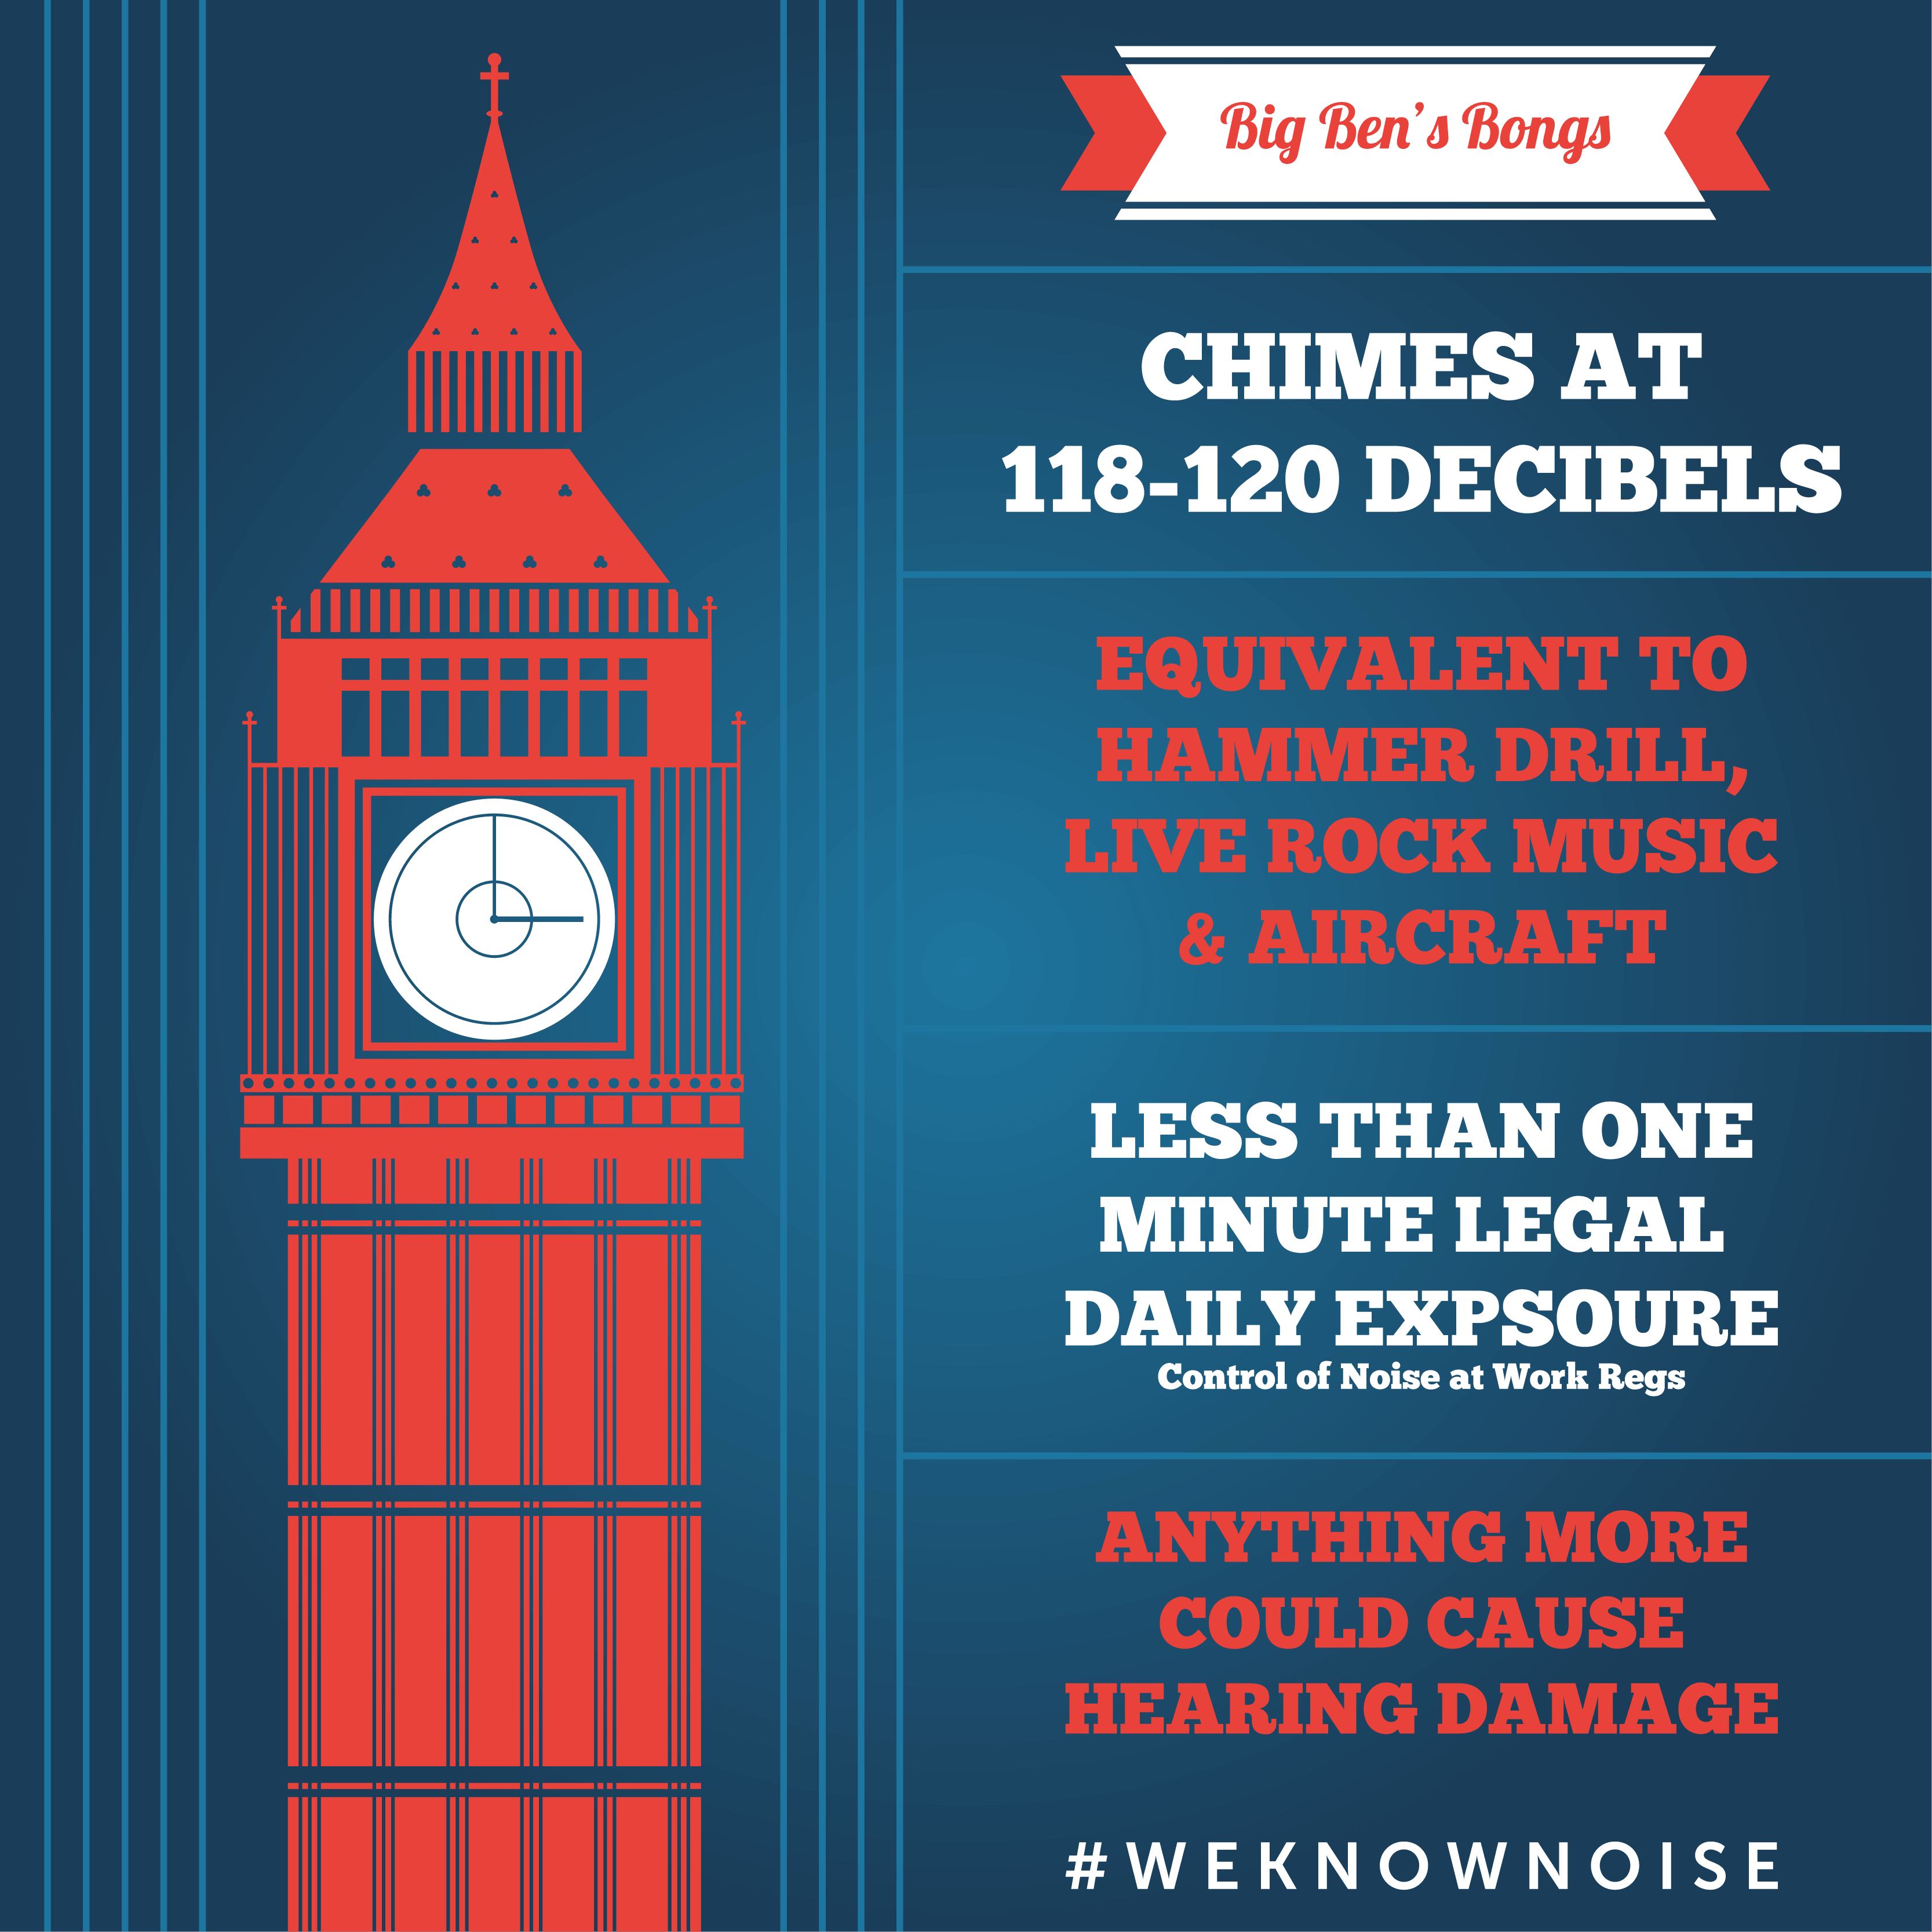 infographic on big ben chimes